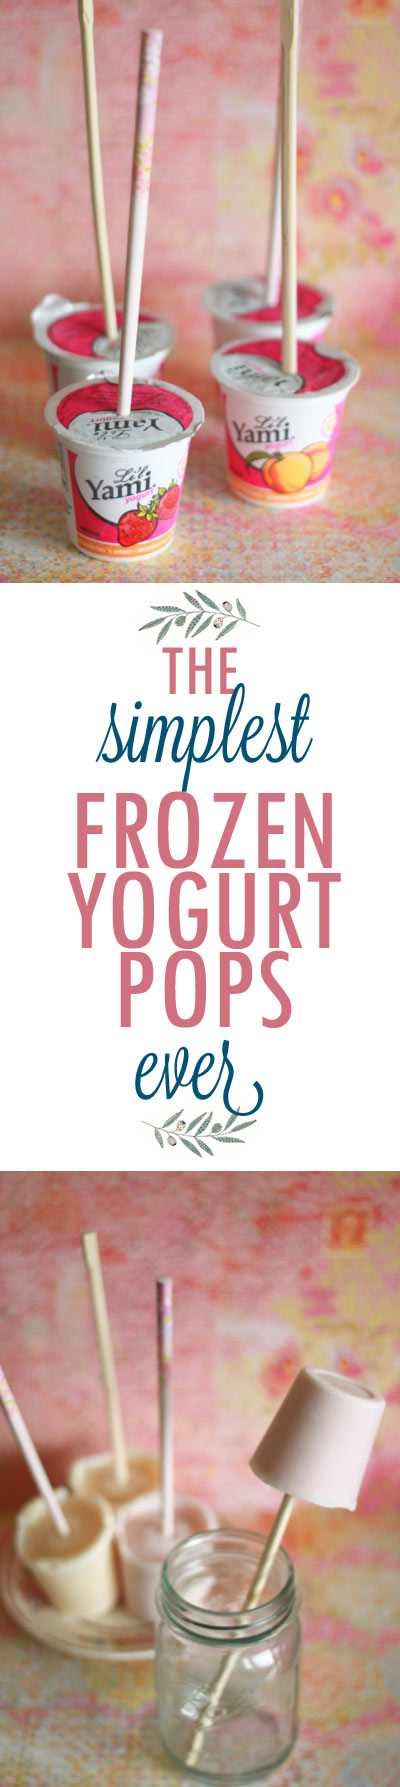 ONE ingredient! Poke a chopstick through the foil lid of a kid-sized yogurt, freeze, and voila! Delicious, healthy, and easy frozen yogurt pops - the simplest frozen yogurt pop recipe ever.